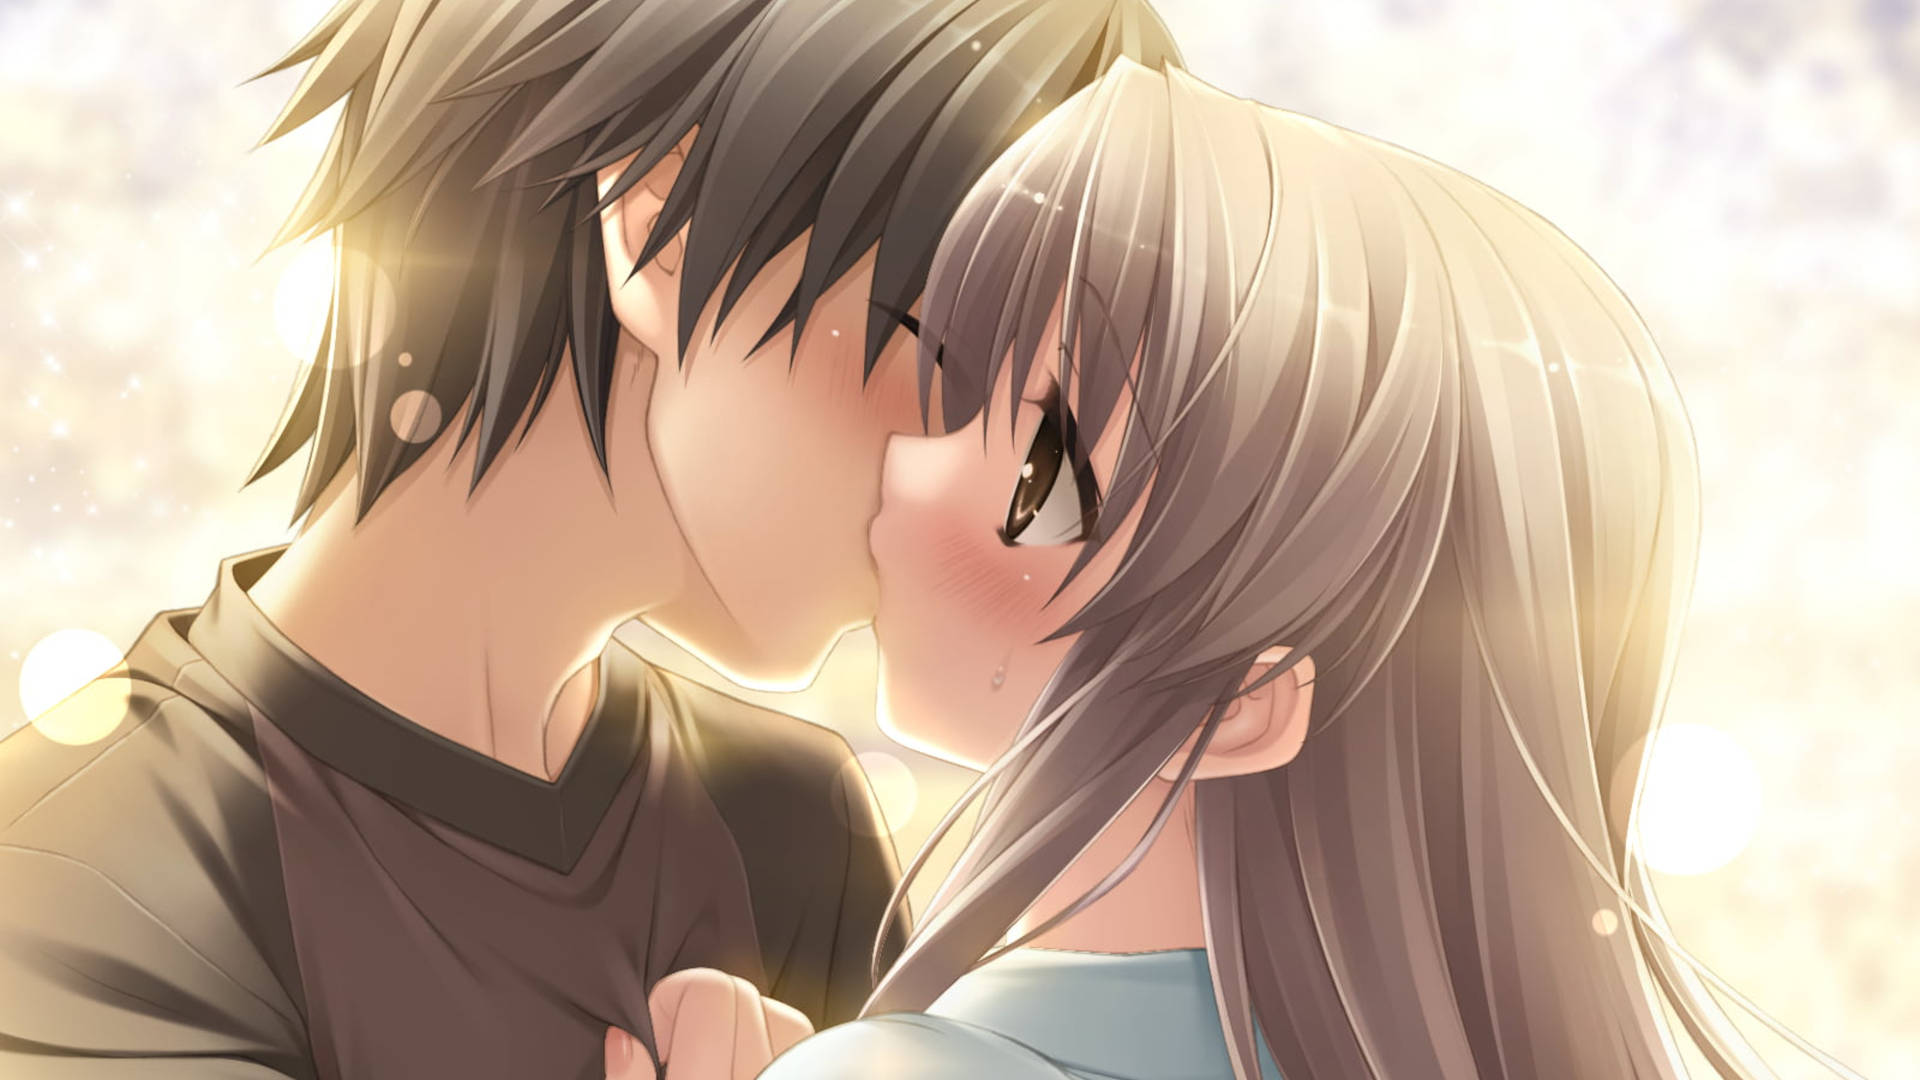 Cute Anime Couple Kiss In Soft Lighting Background